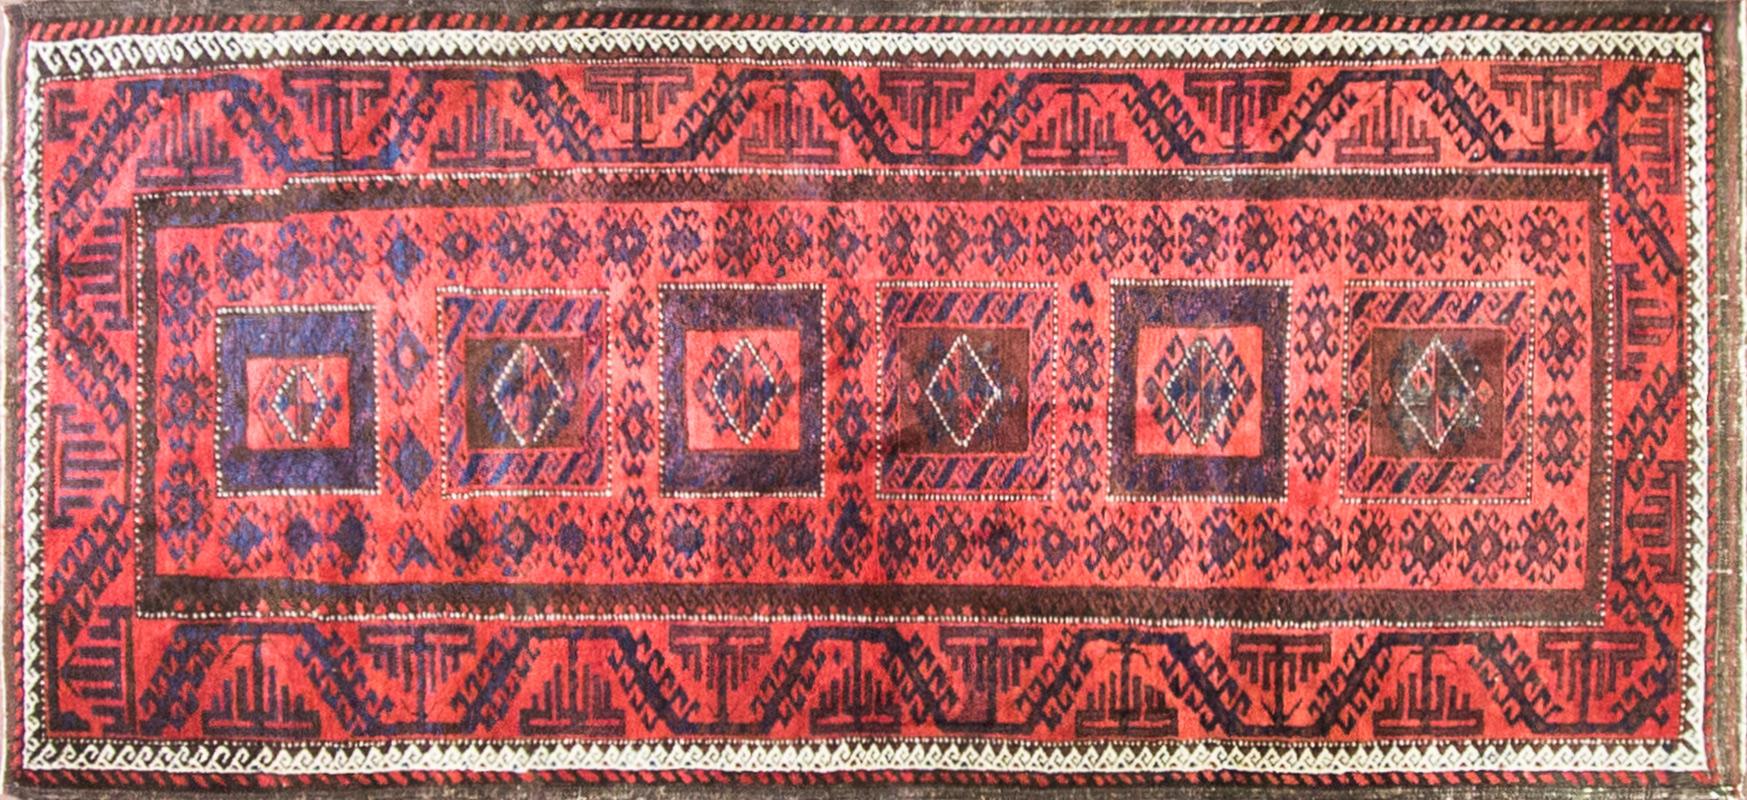 The Baluchi people where a tribe of nomads that migrated from region near the Caspian sea to the area of southern Soviet central Asia, Afghanistan Khorasan province of Iran and Pakistan and they speak Persian Farsi language. Their rugs display color